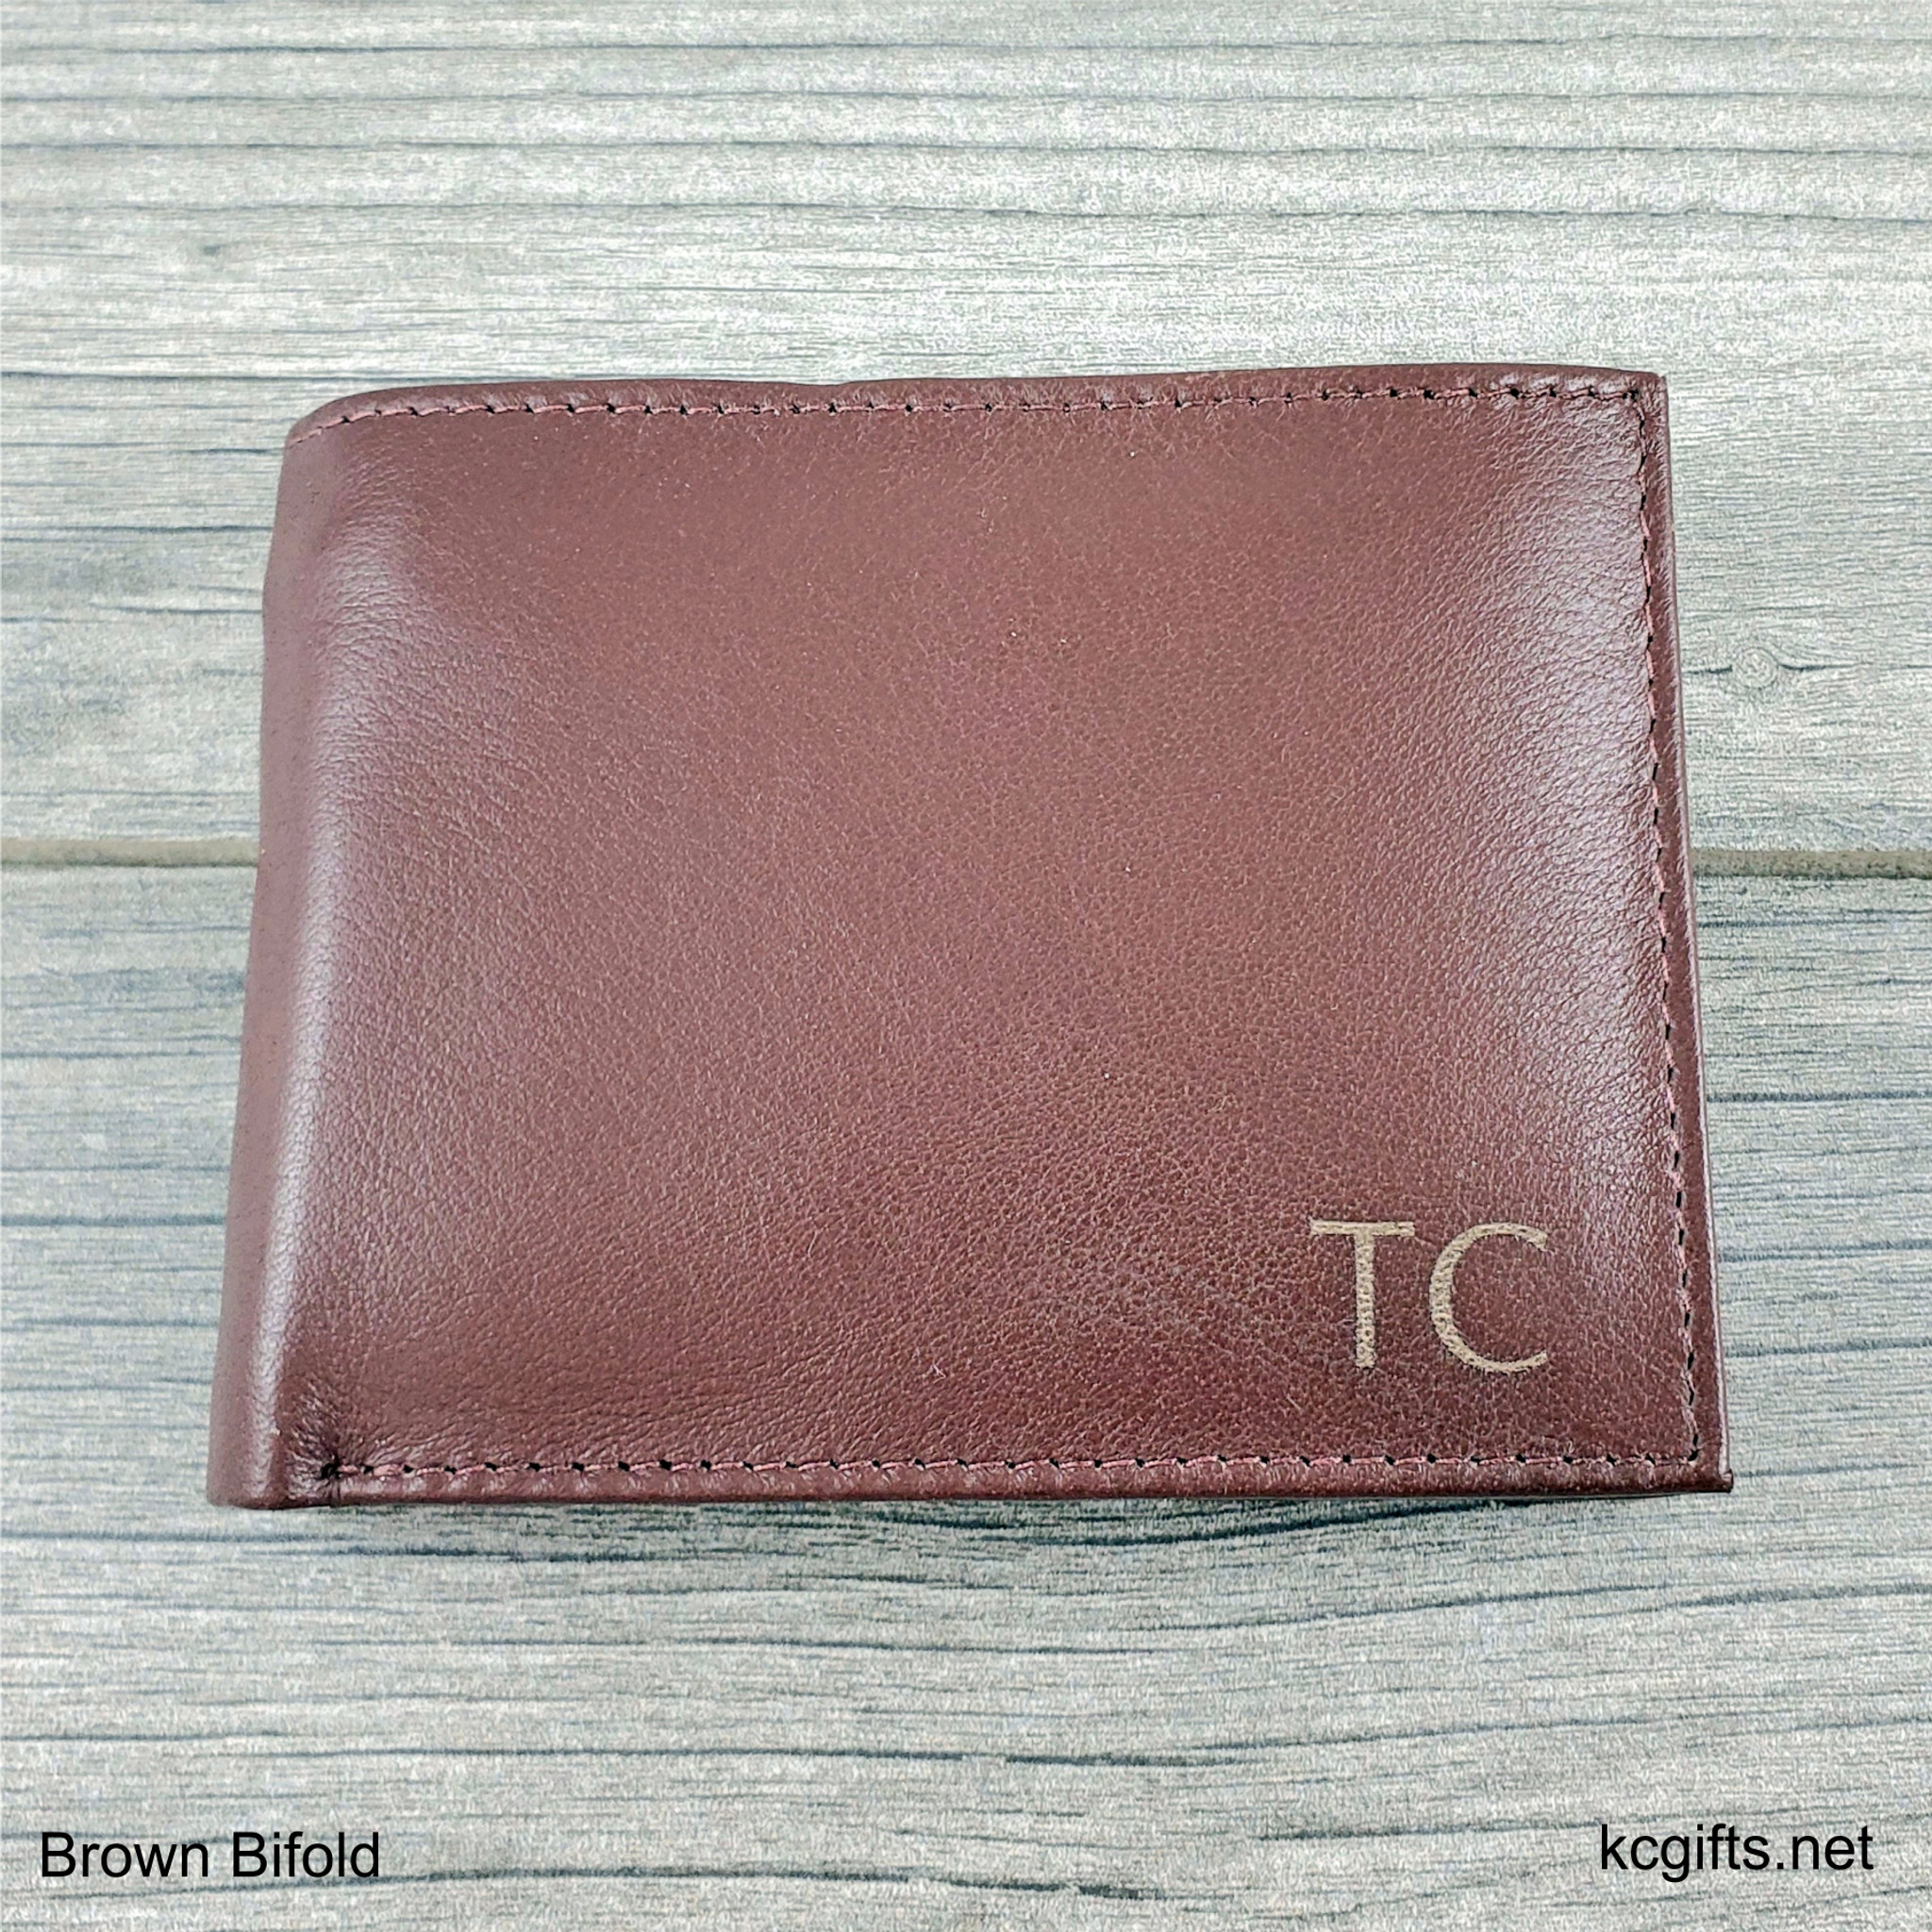 Wallet Black Trifold - Personalized Men's Leather Wallet with Engraved  Monogram